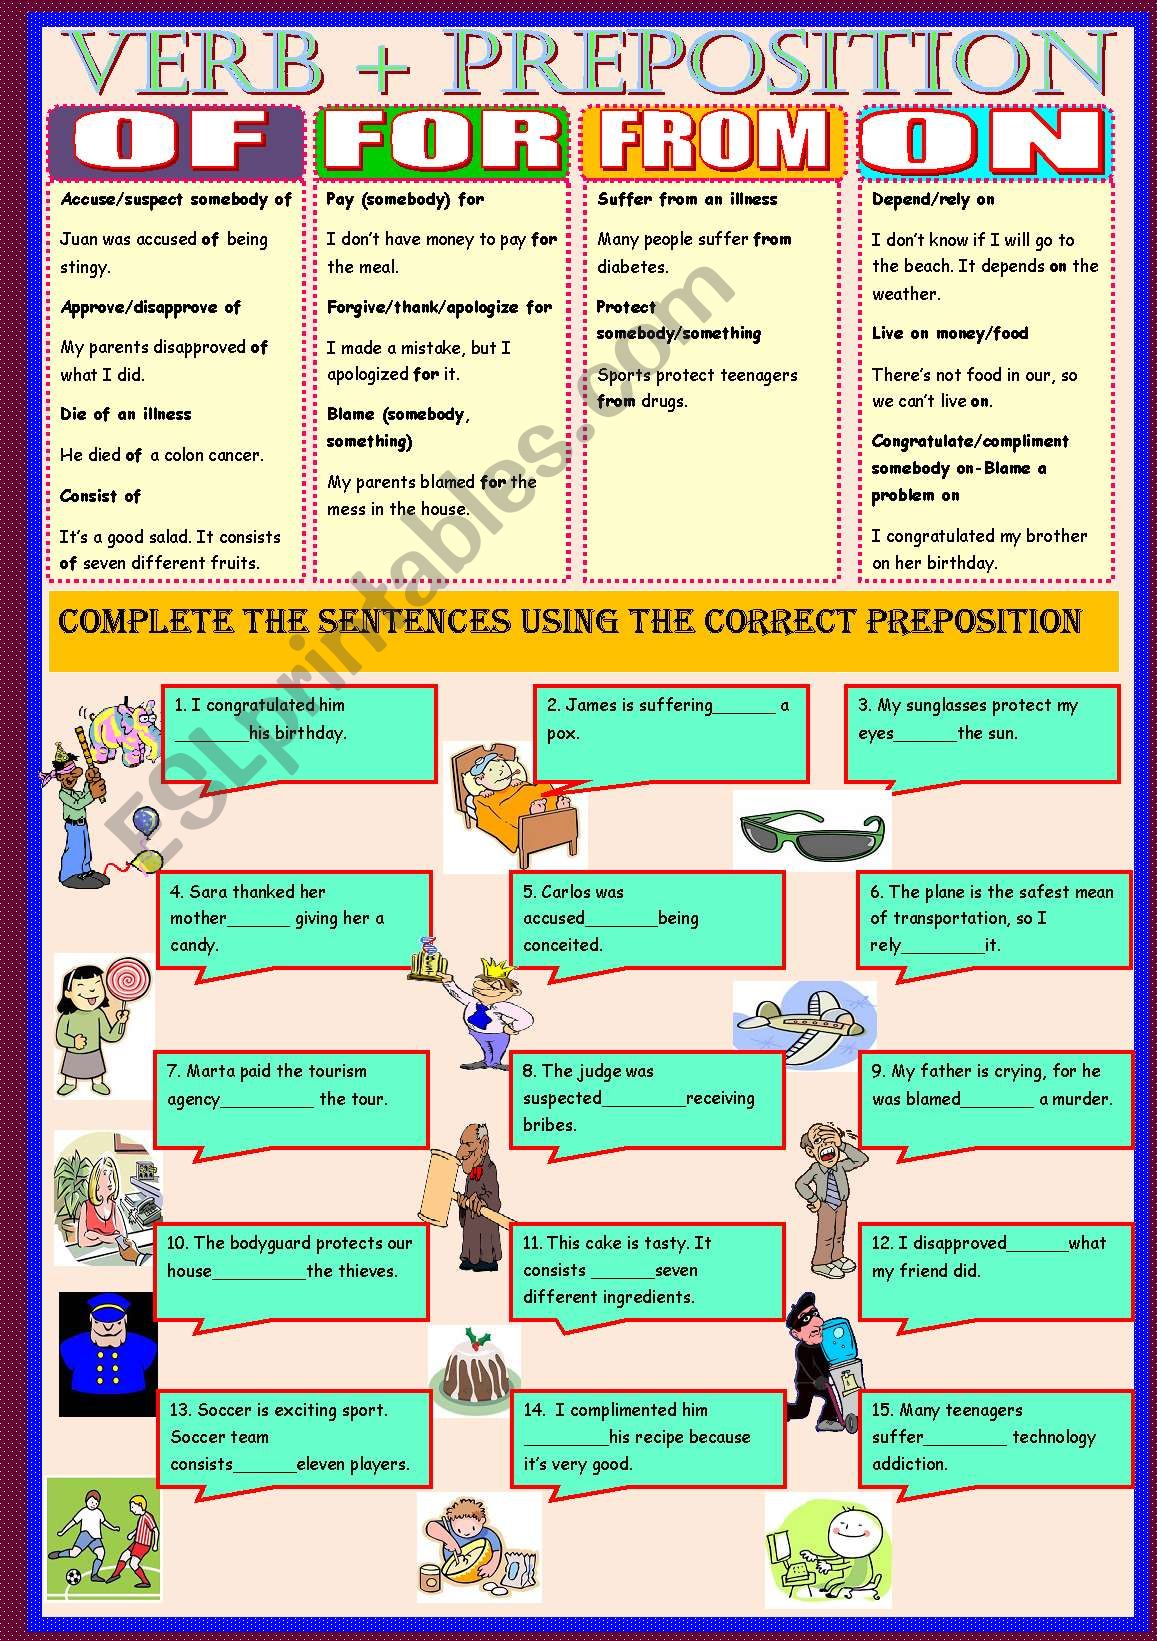 verbs+preposition-of-for-from-on